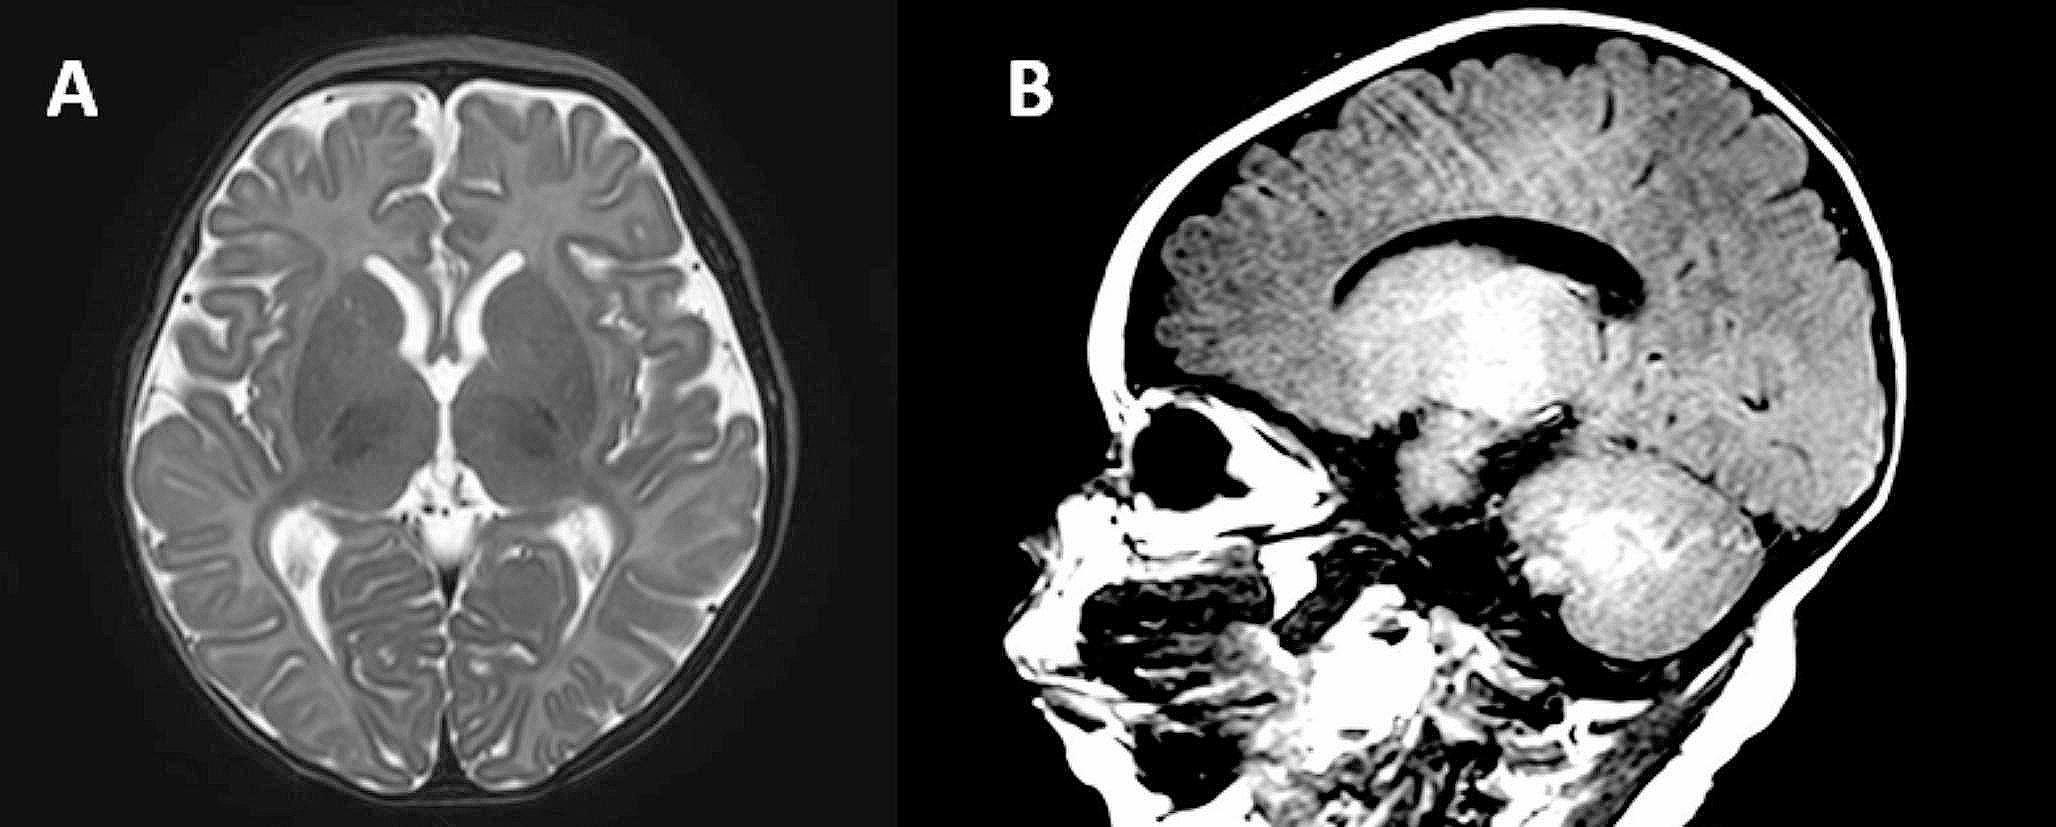 Early-onset dysphagia and severe neurodevelopmental disorder as early signs in a patient with two novel variants in NARS1: a case report and brief review of the literature